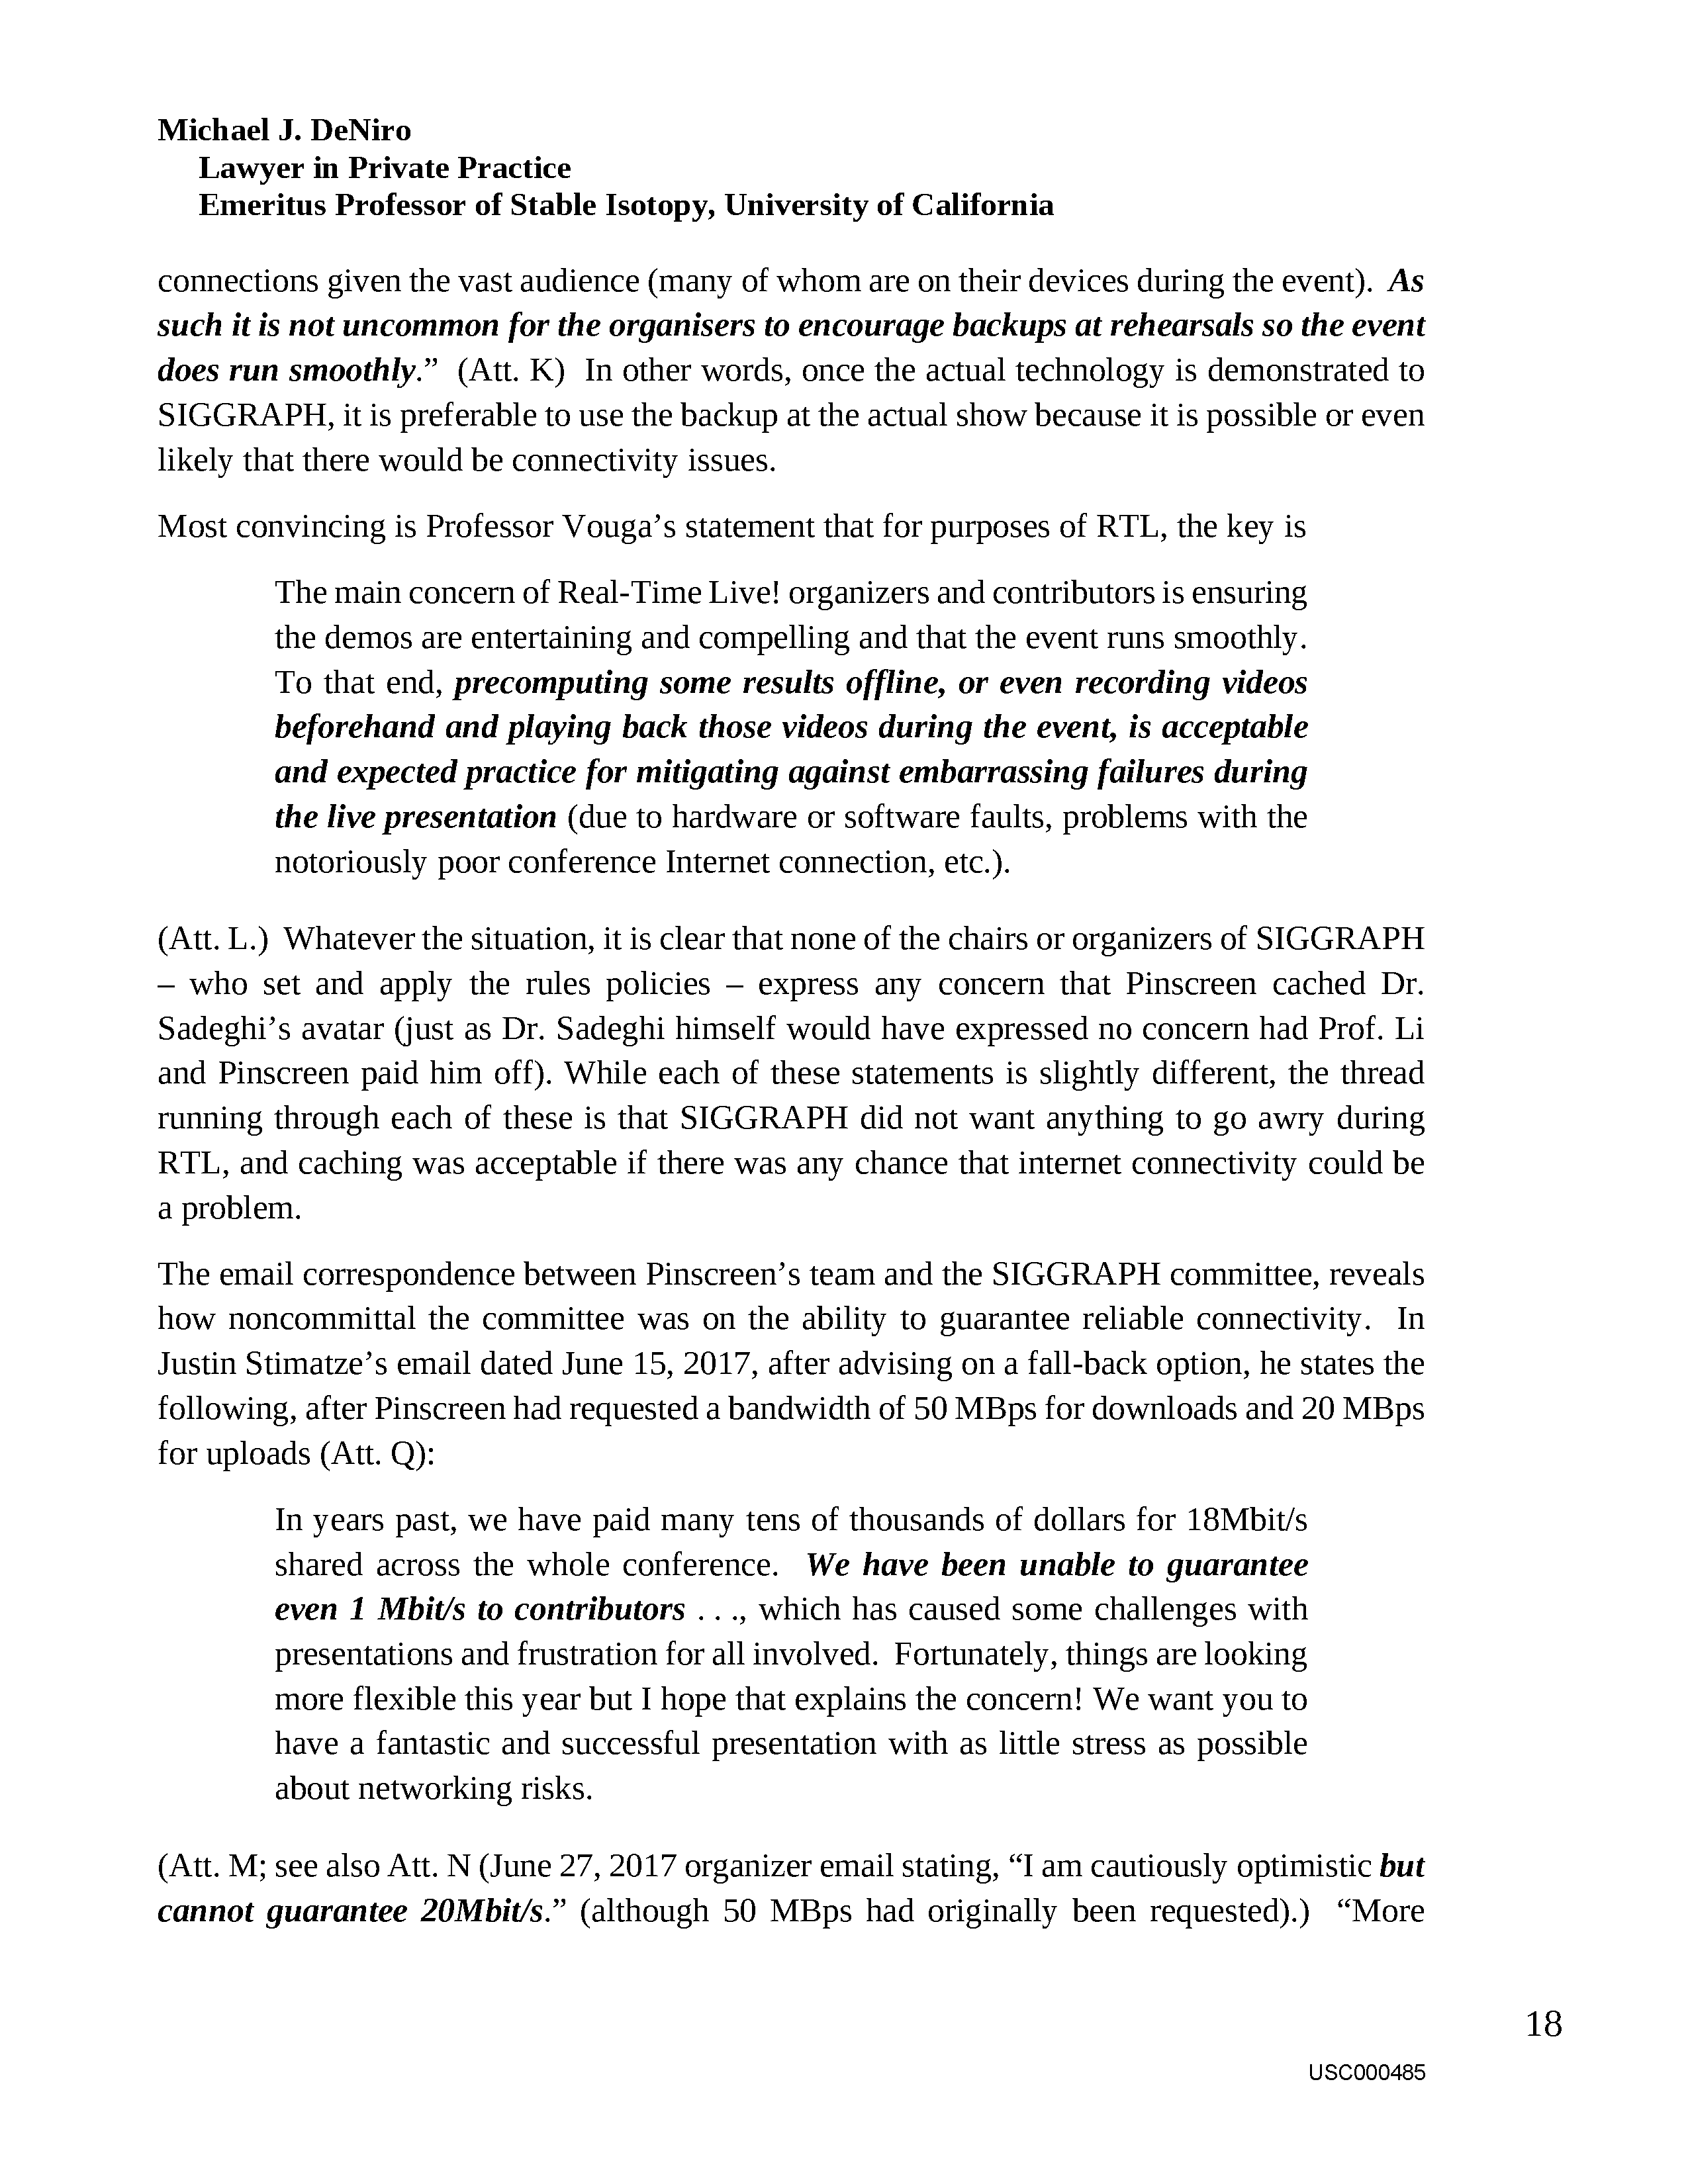 USC's Investigation Report re Hao Li's and Pinscreen's Scientific Misconduct at ACM SIGGRAPH RTL 2017 - Full Report Page 487